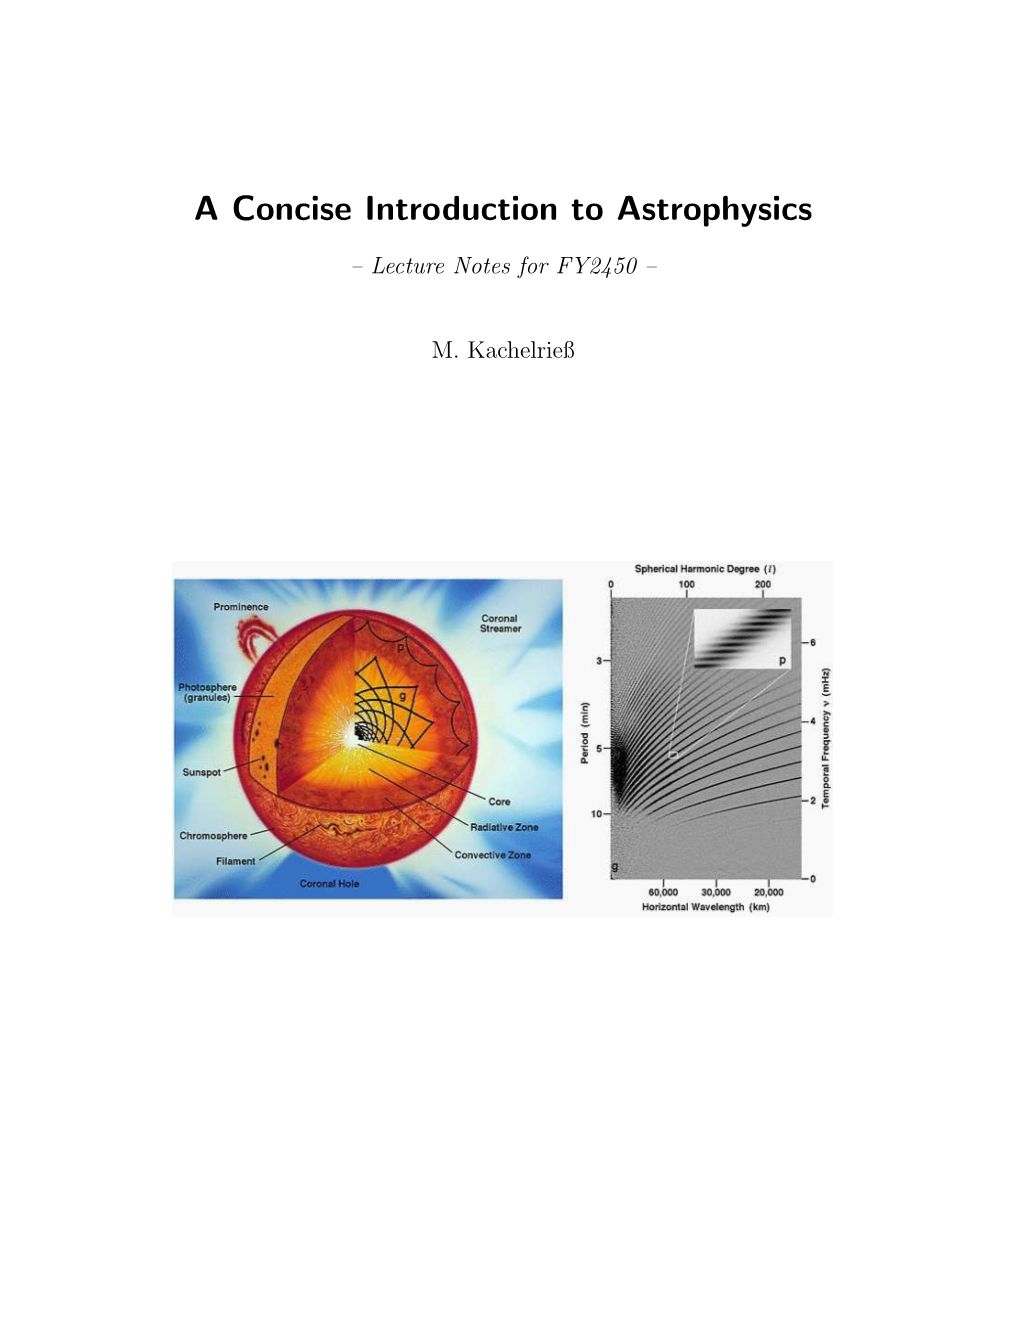 A Concise Introduction to Astrophysics